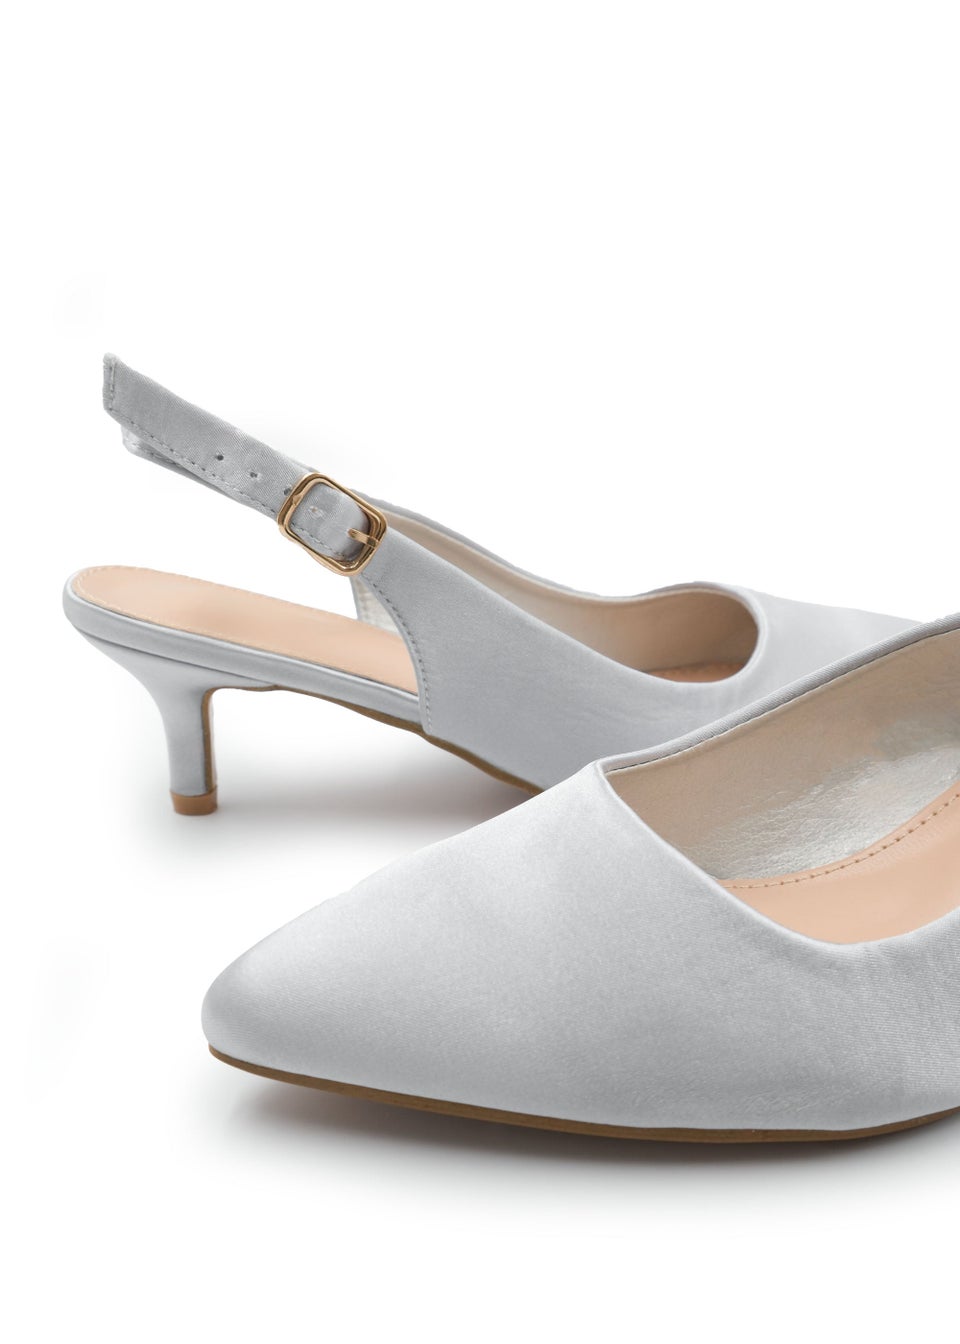 Where's That From Silver Satin Quentin Low Kitten Heels